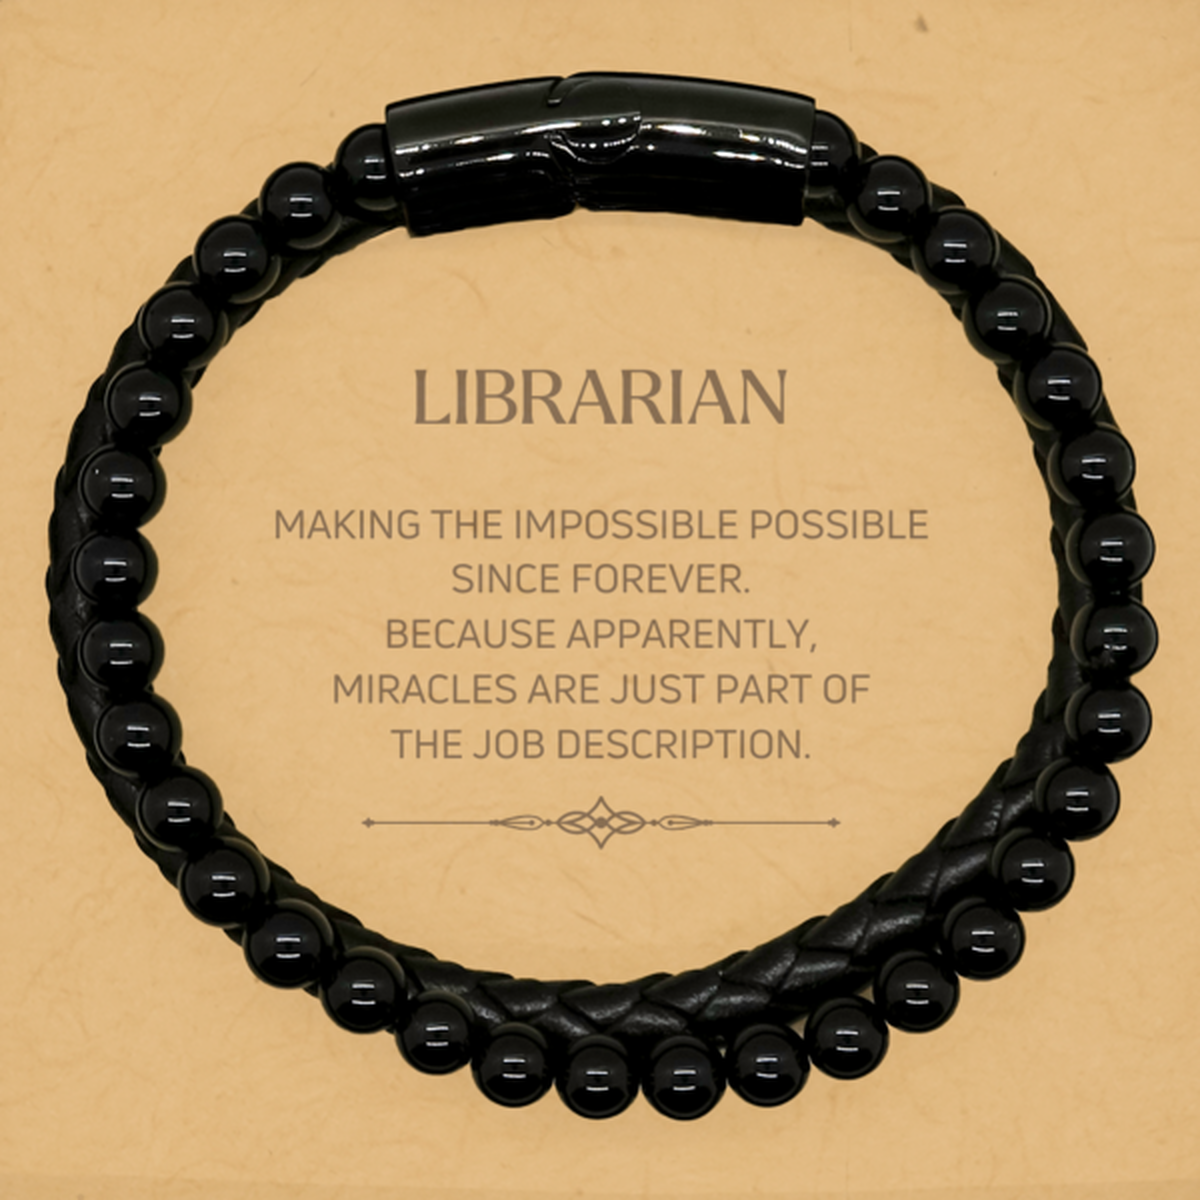 Funny Librarian Gifts, Miracles are just part of the job description, Inspirational Birthday Stone Leather Bracelets For Librarian, Men, Women, Coworkers, Friends, Boss